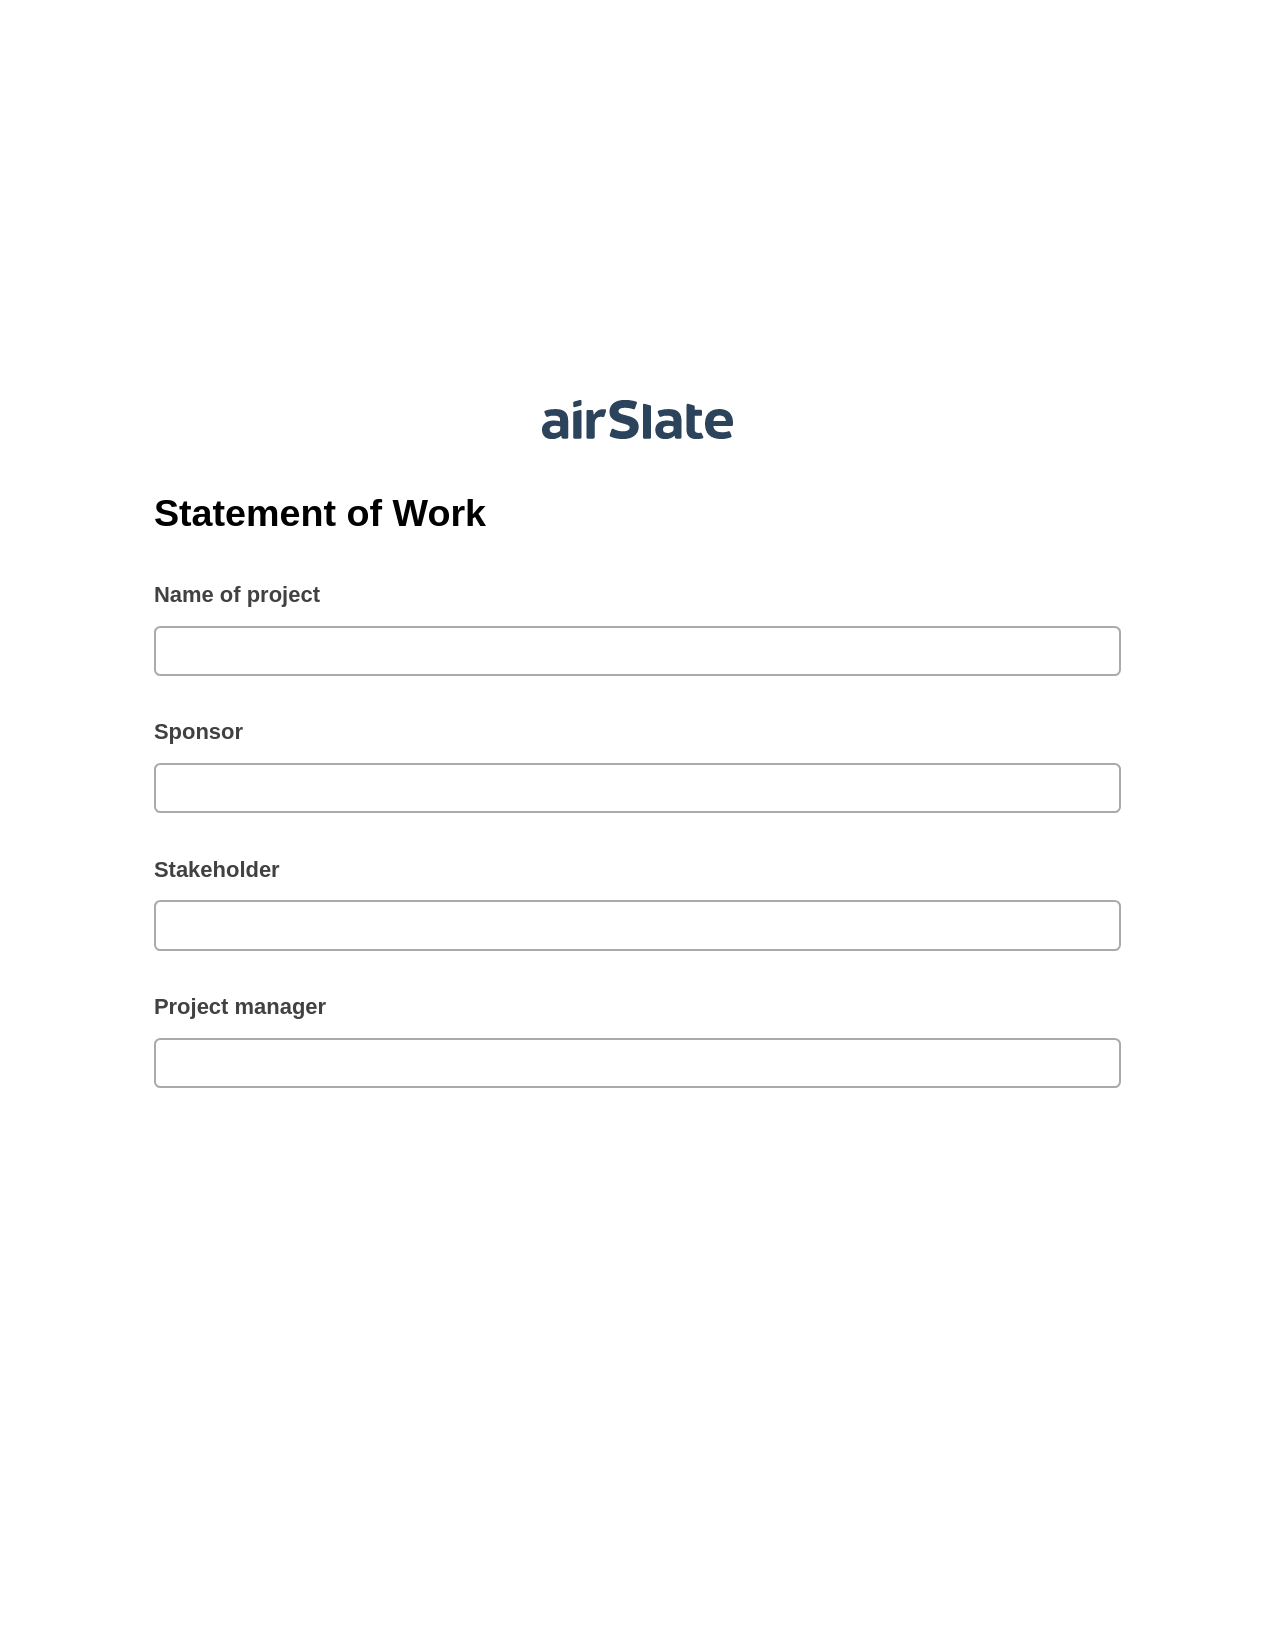 Statement of Work Pre-fill from another Slate Bot, Create slate addon, Export to Google Sheet Bot